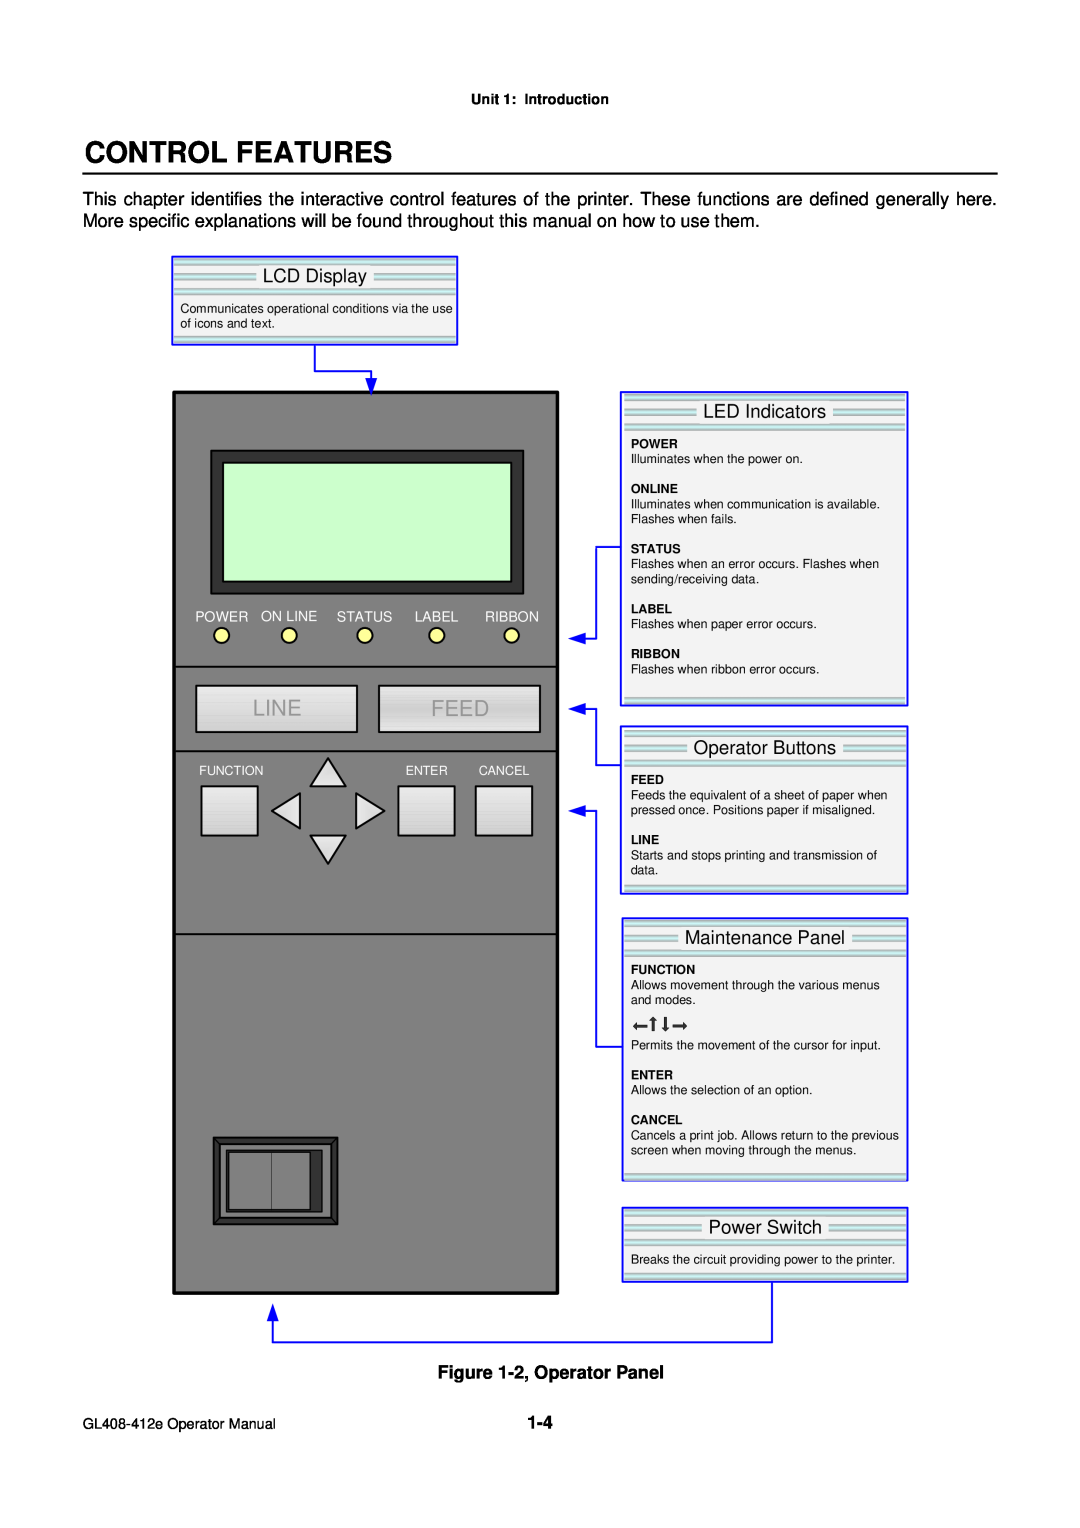 SATO GL4XXE Control Features, Line, Feed, LCD Display, LED Indicators, Operator Buttons, Maintenance Panel, Power Switch 